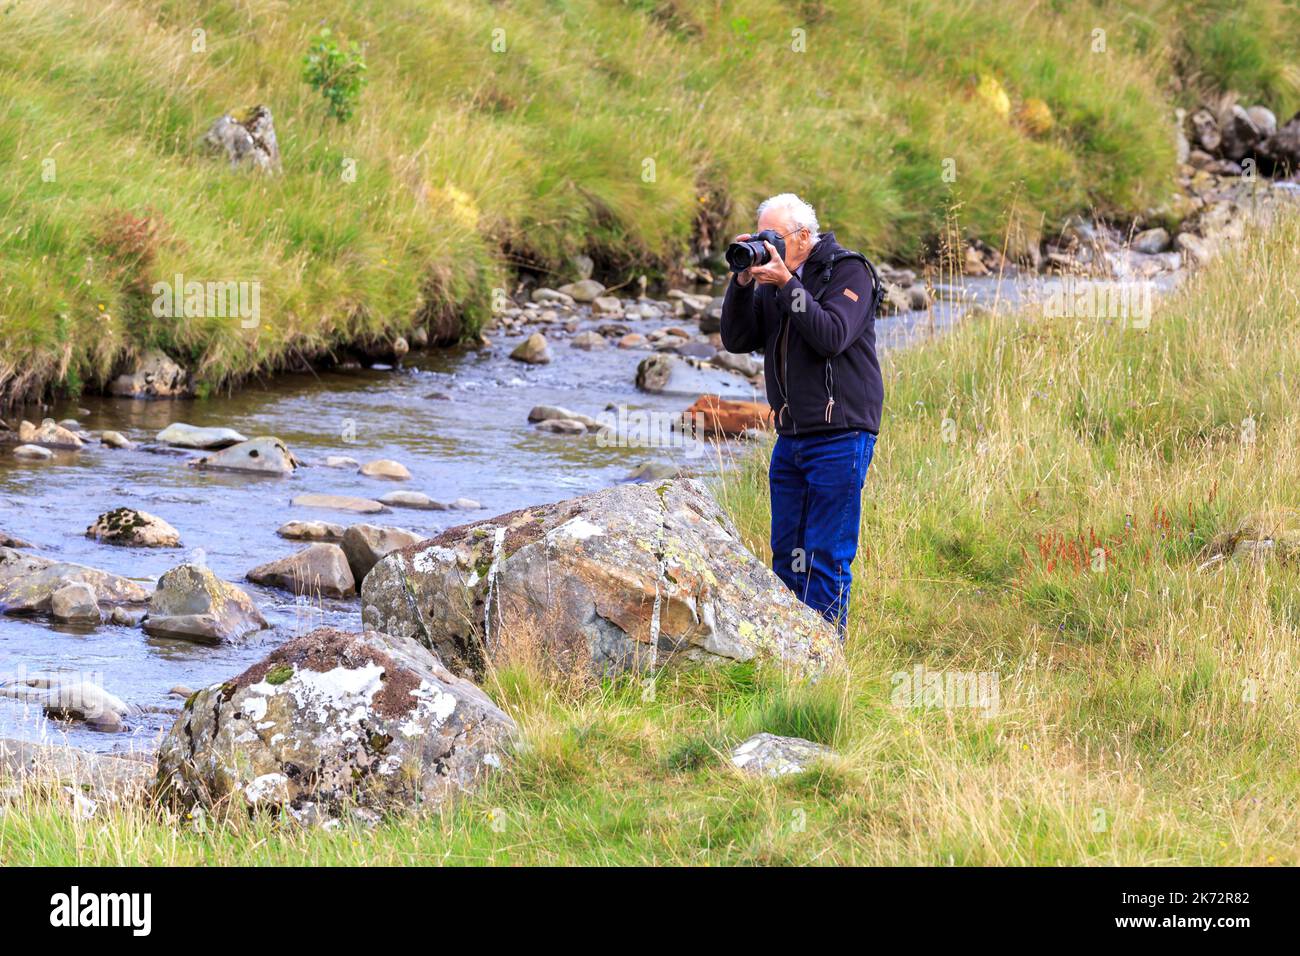 Photographer standing by a large rock with camera taking picture Stock Photo